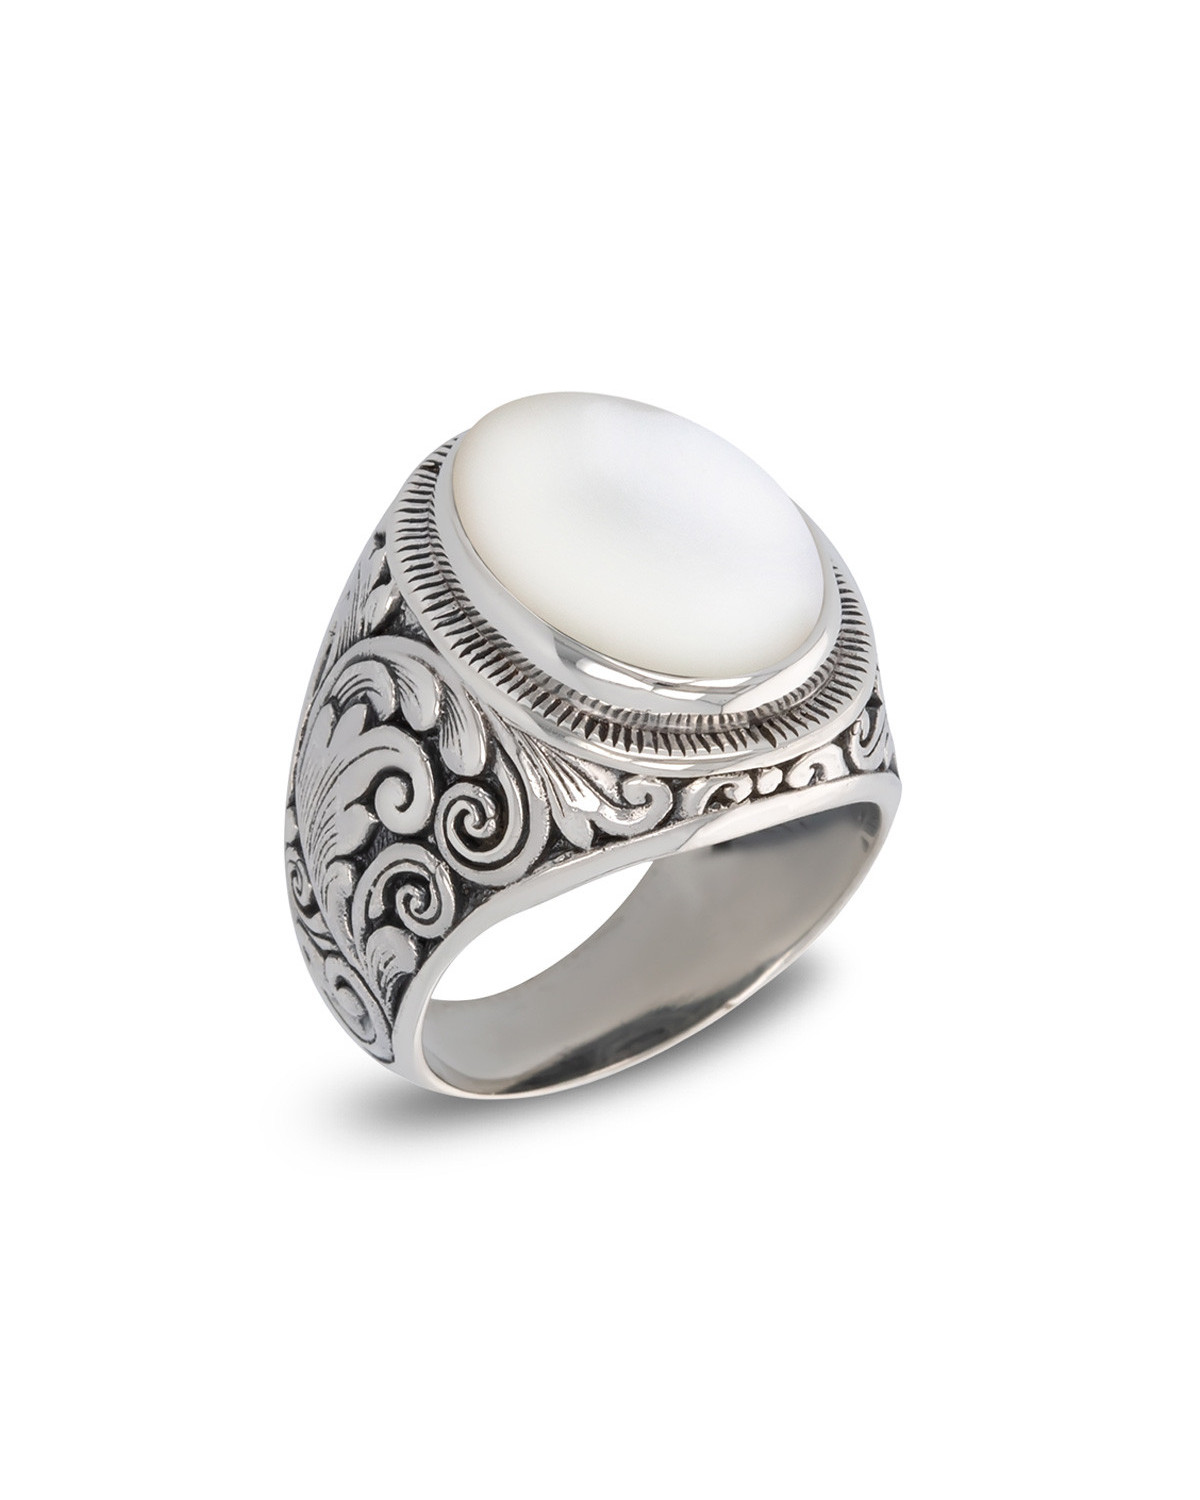 Antique effect 925 Sterling Silver White Mother-of-pearl Biker Ring